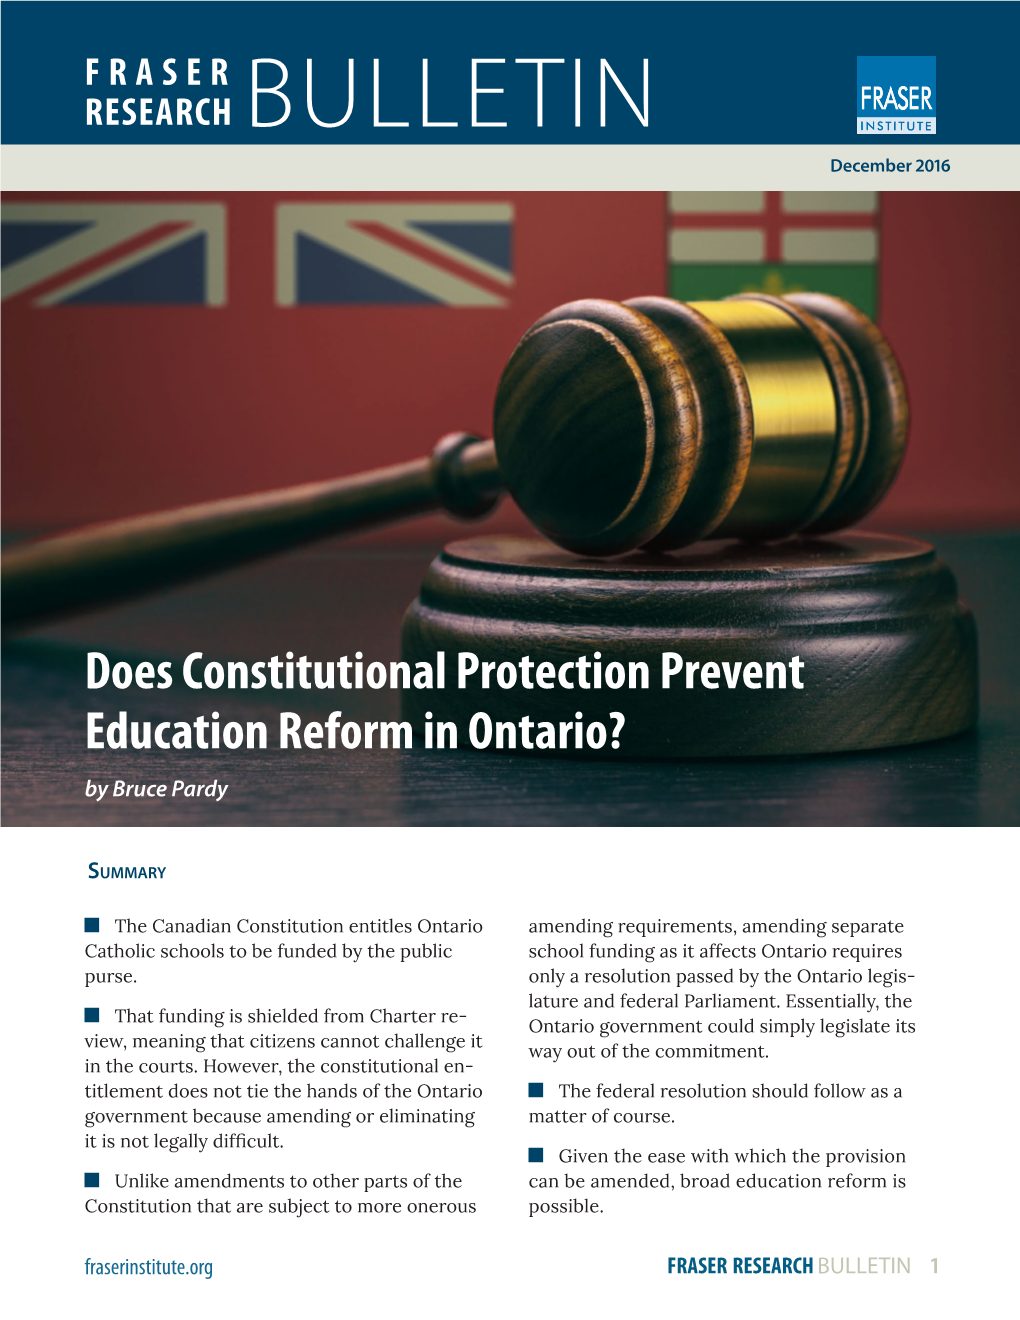 Does Constitutional Protection Prevent Education Reform in Ontario? by Bruce Pardy